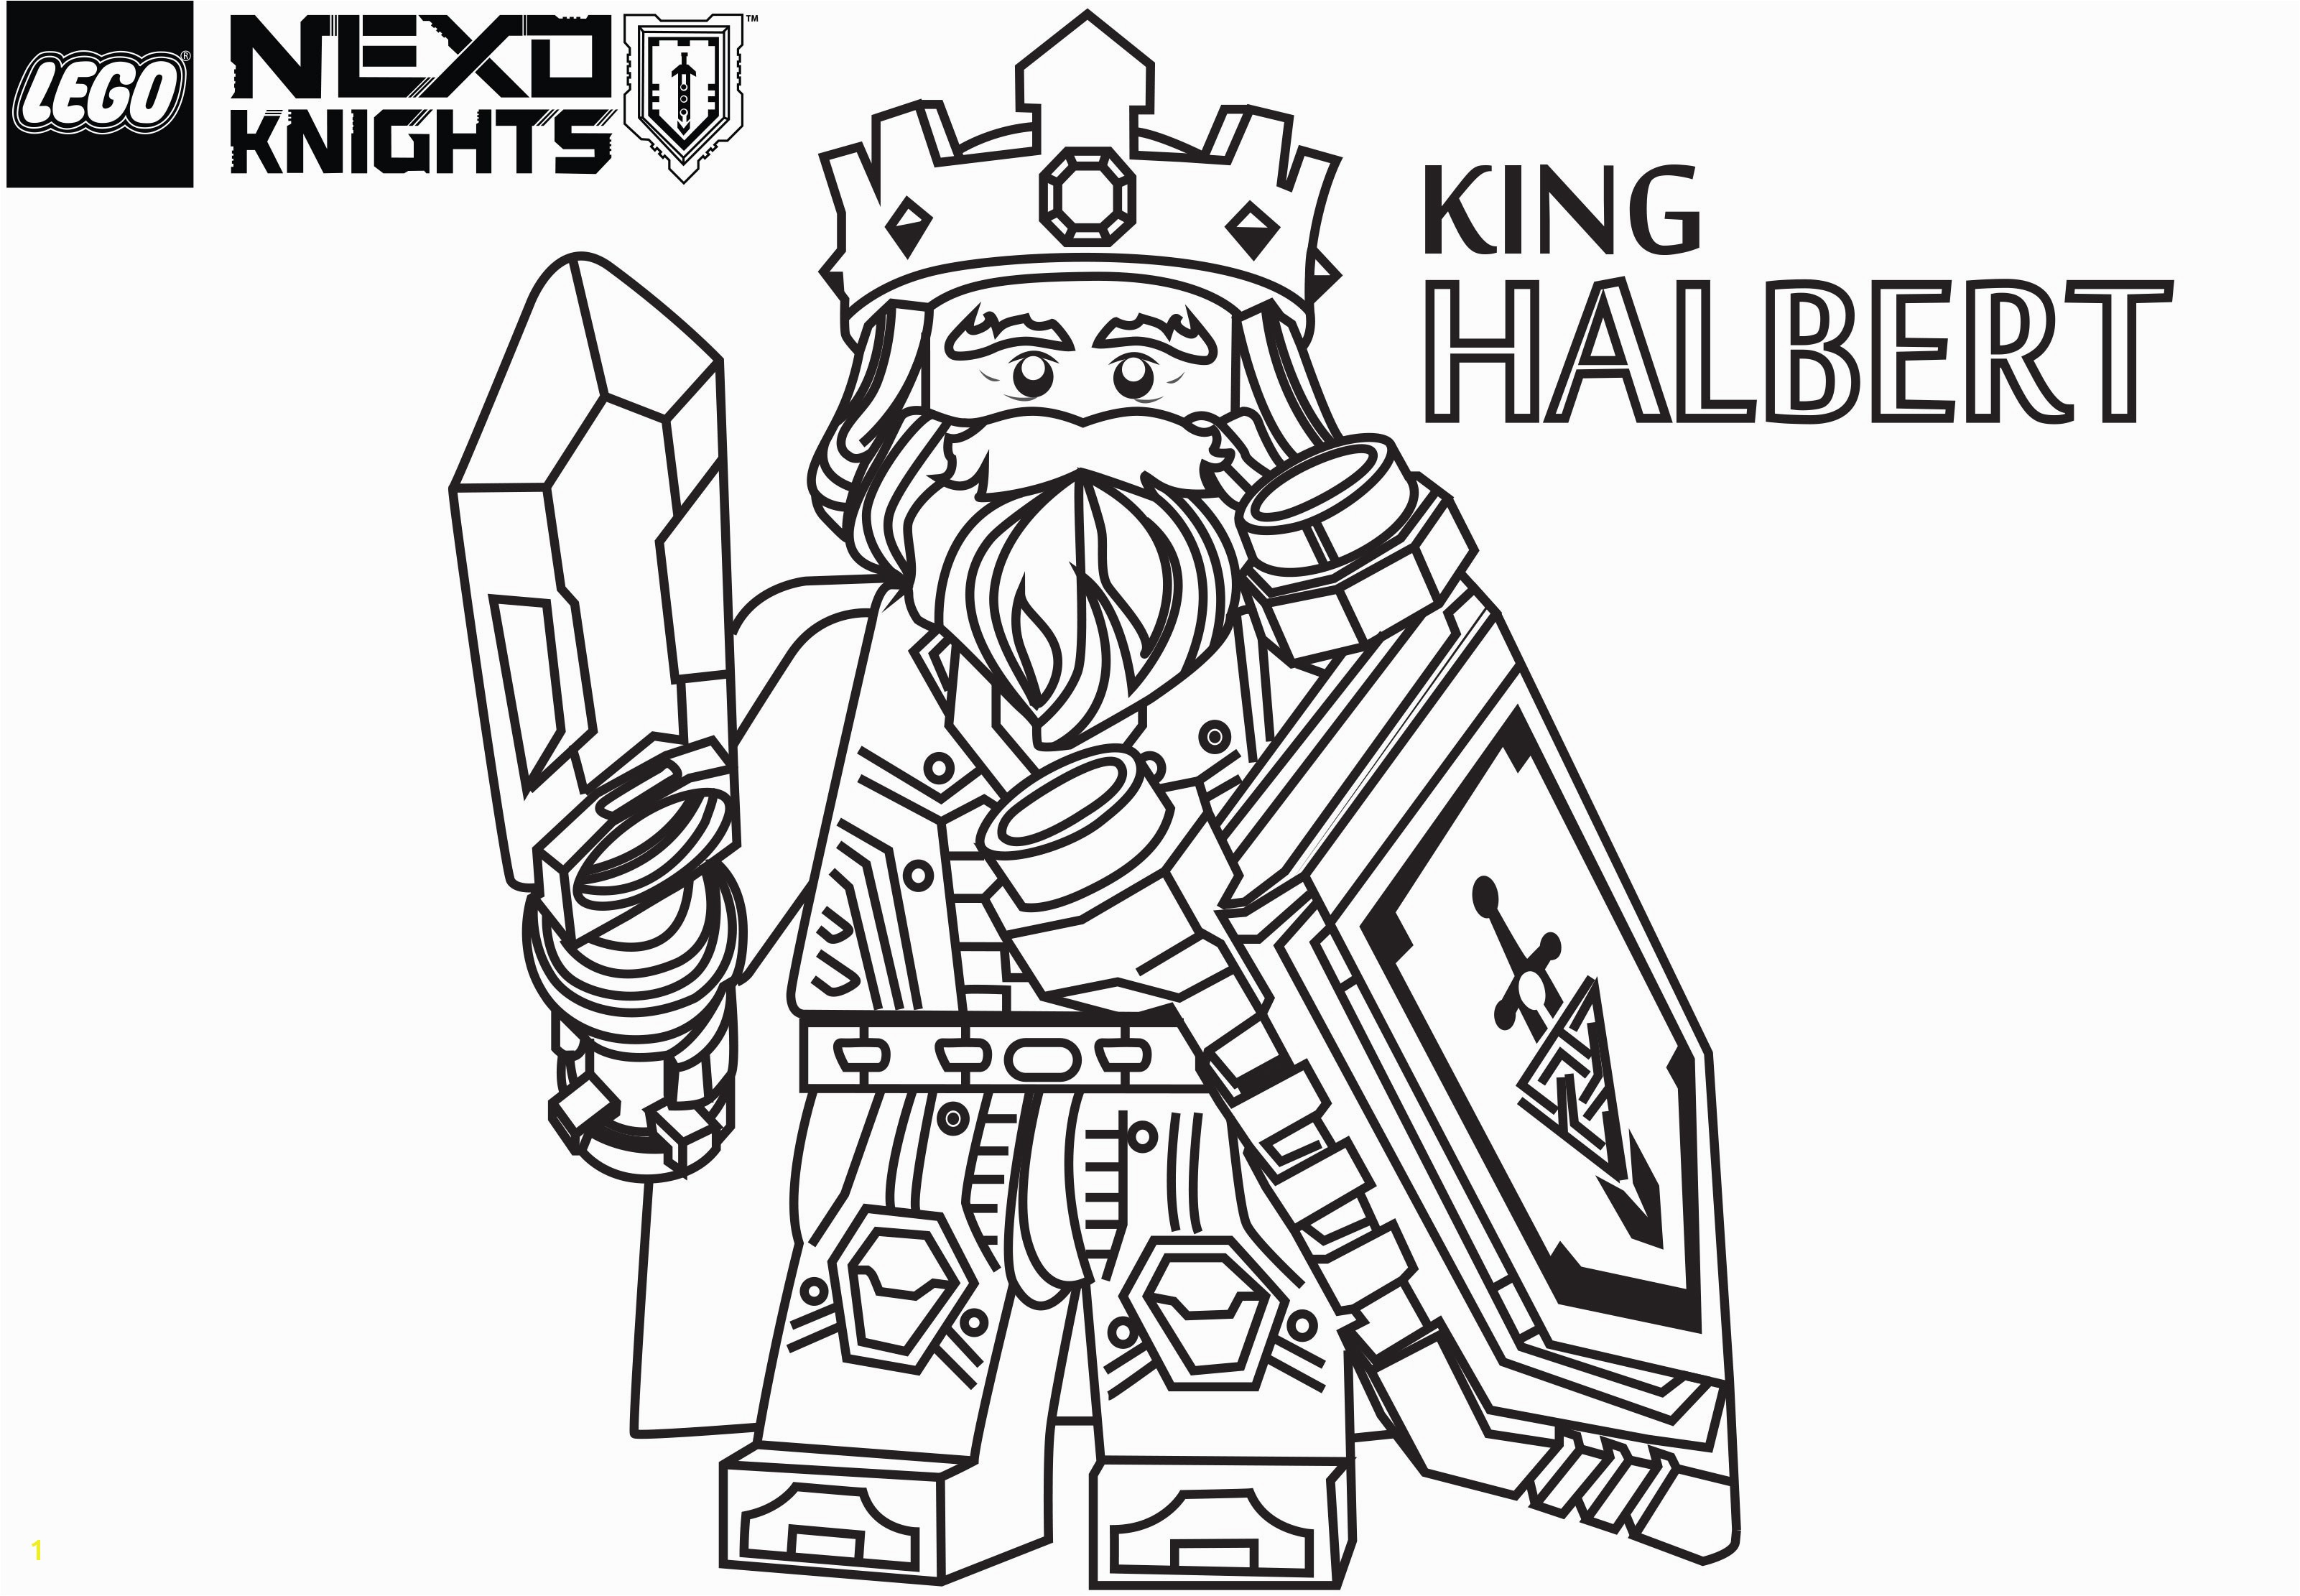 Nexo Knights Coloring Pages Coloring Ideas Lego Nexo Knights Games To Play Free Coloring